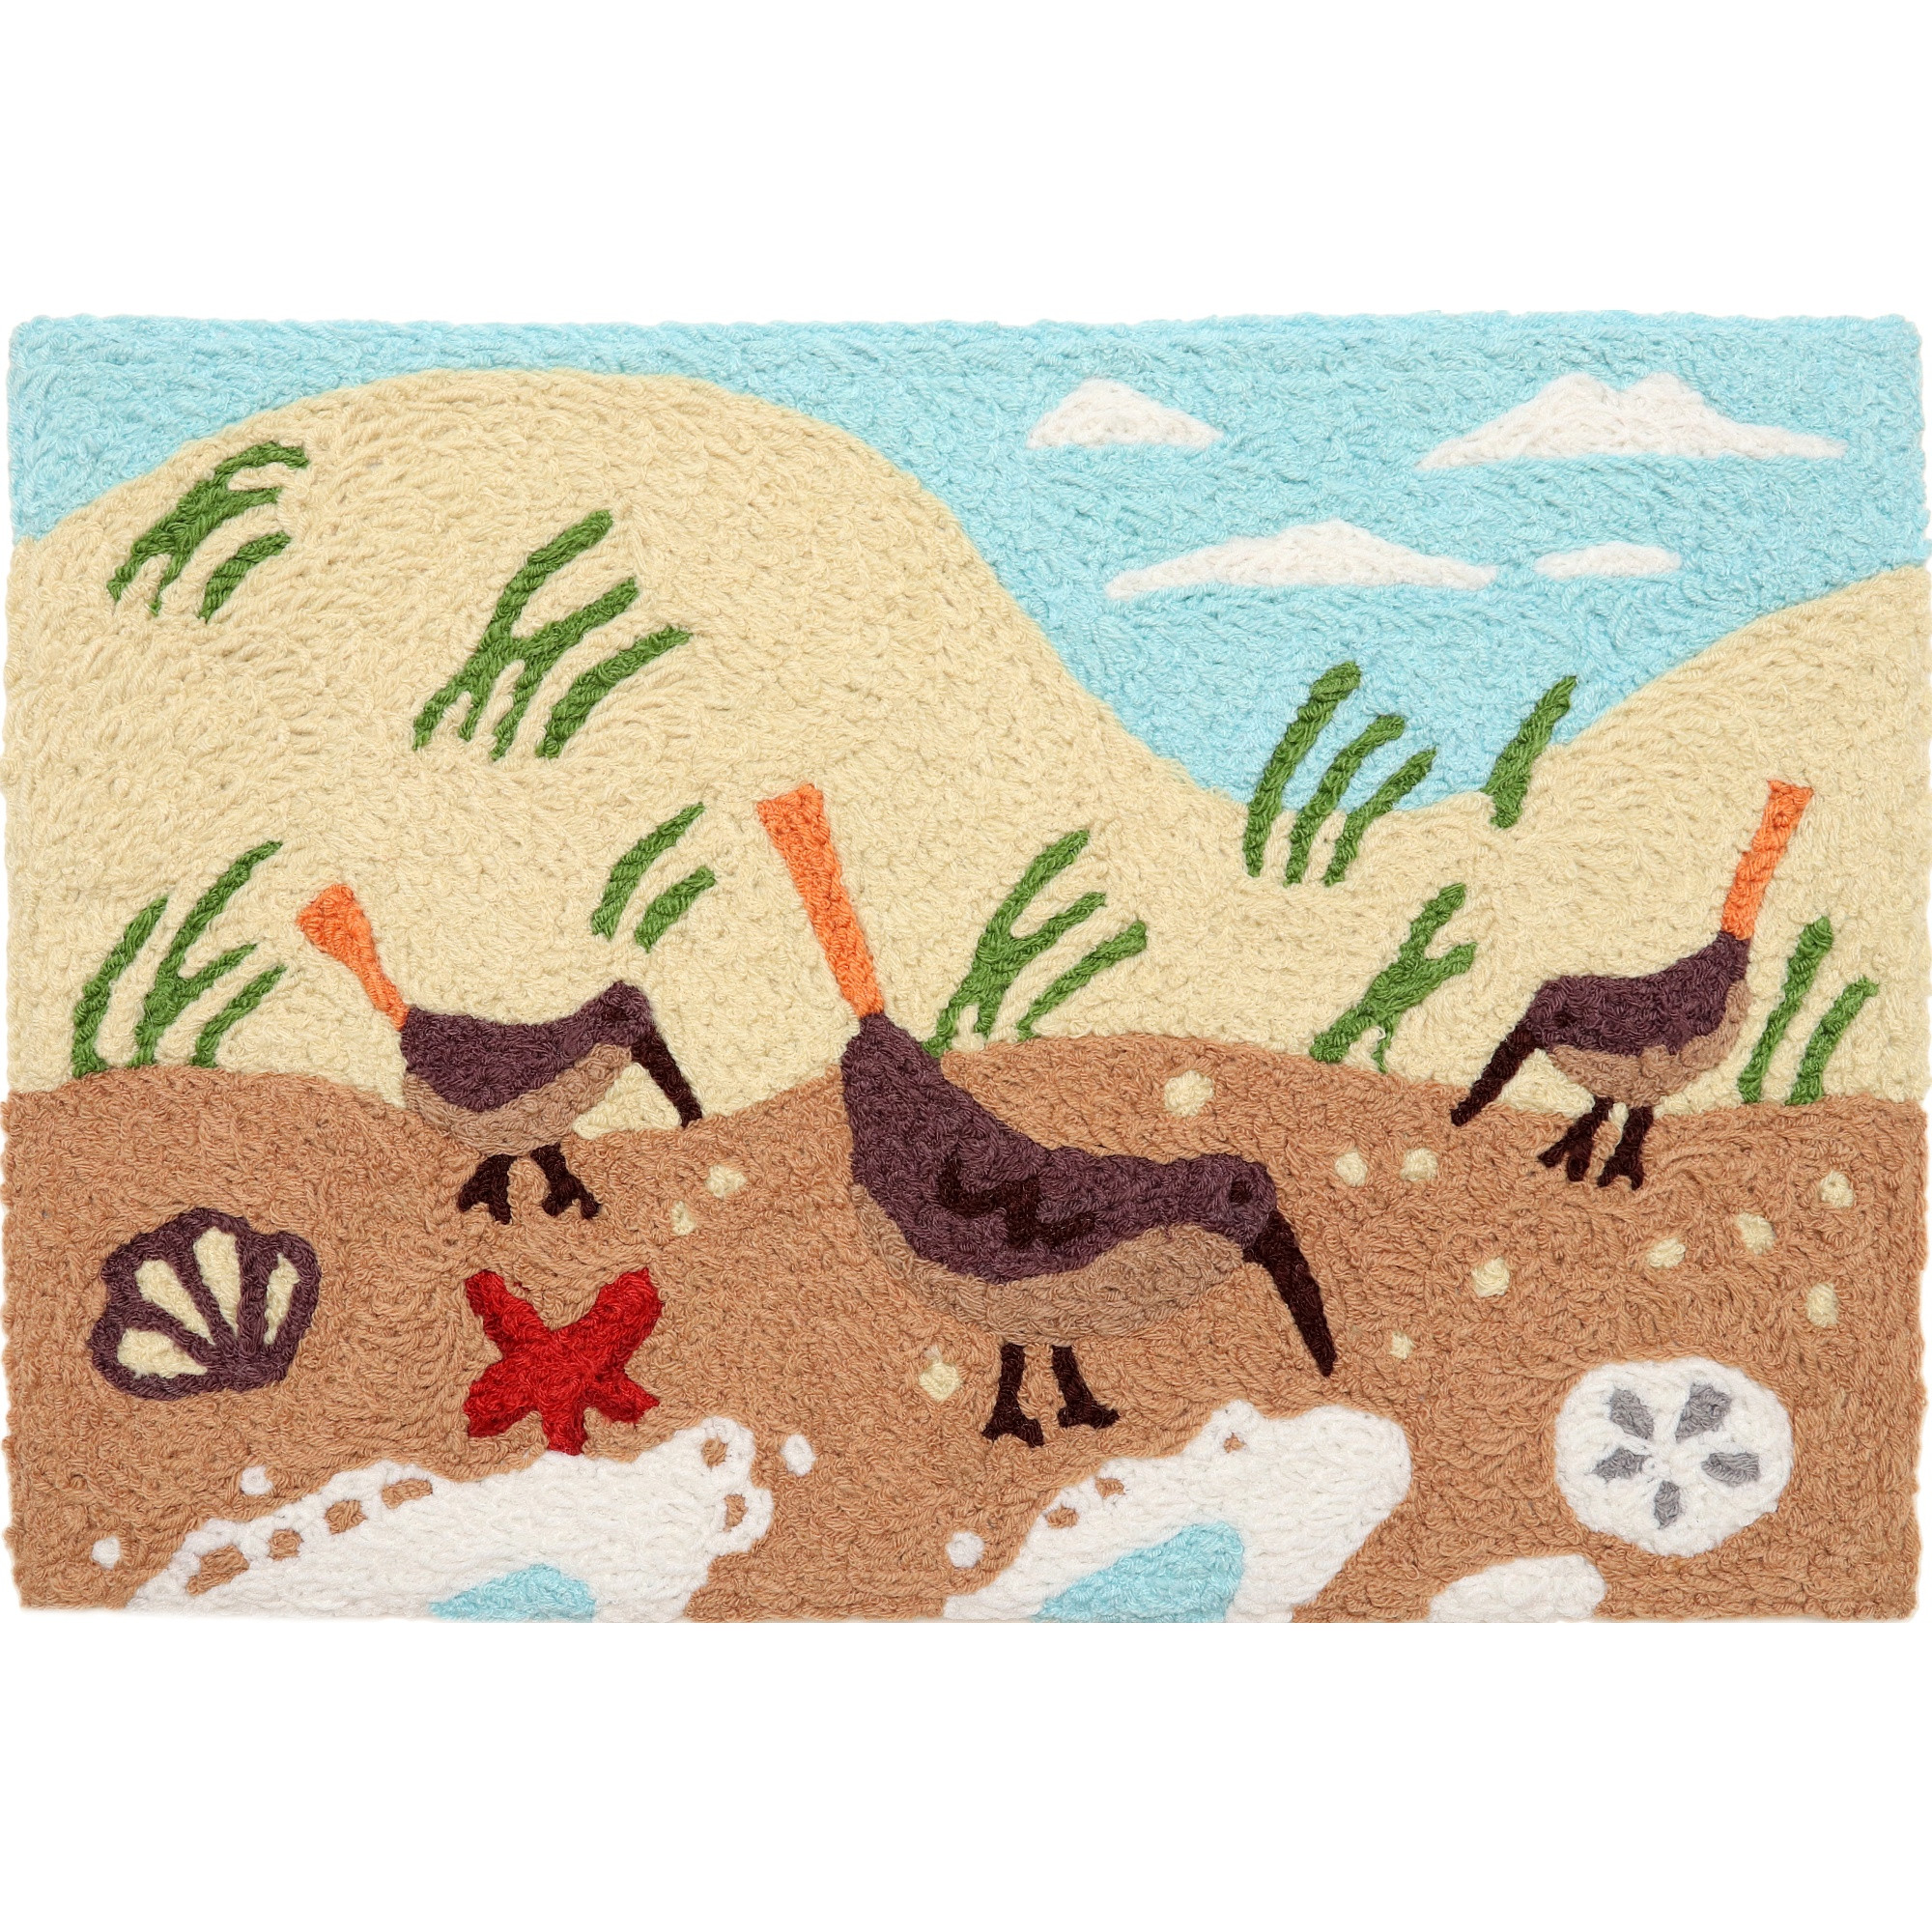 Jellybean Sand Pipers by The Ocean's Edge 20"x30" Washable Accent Rug